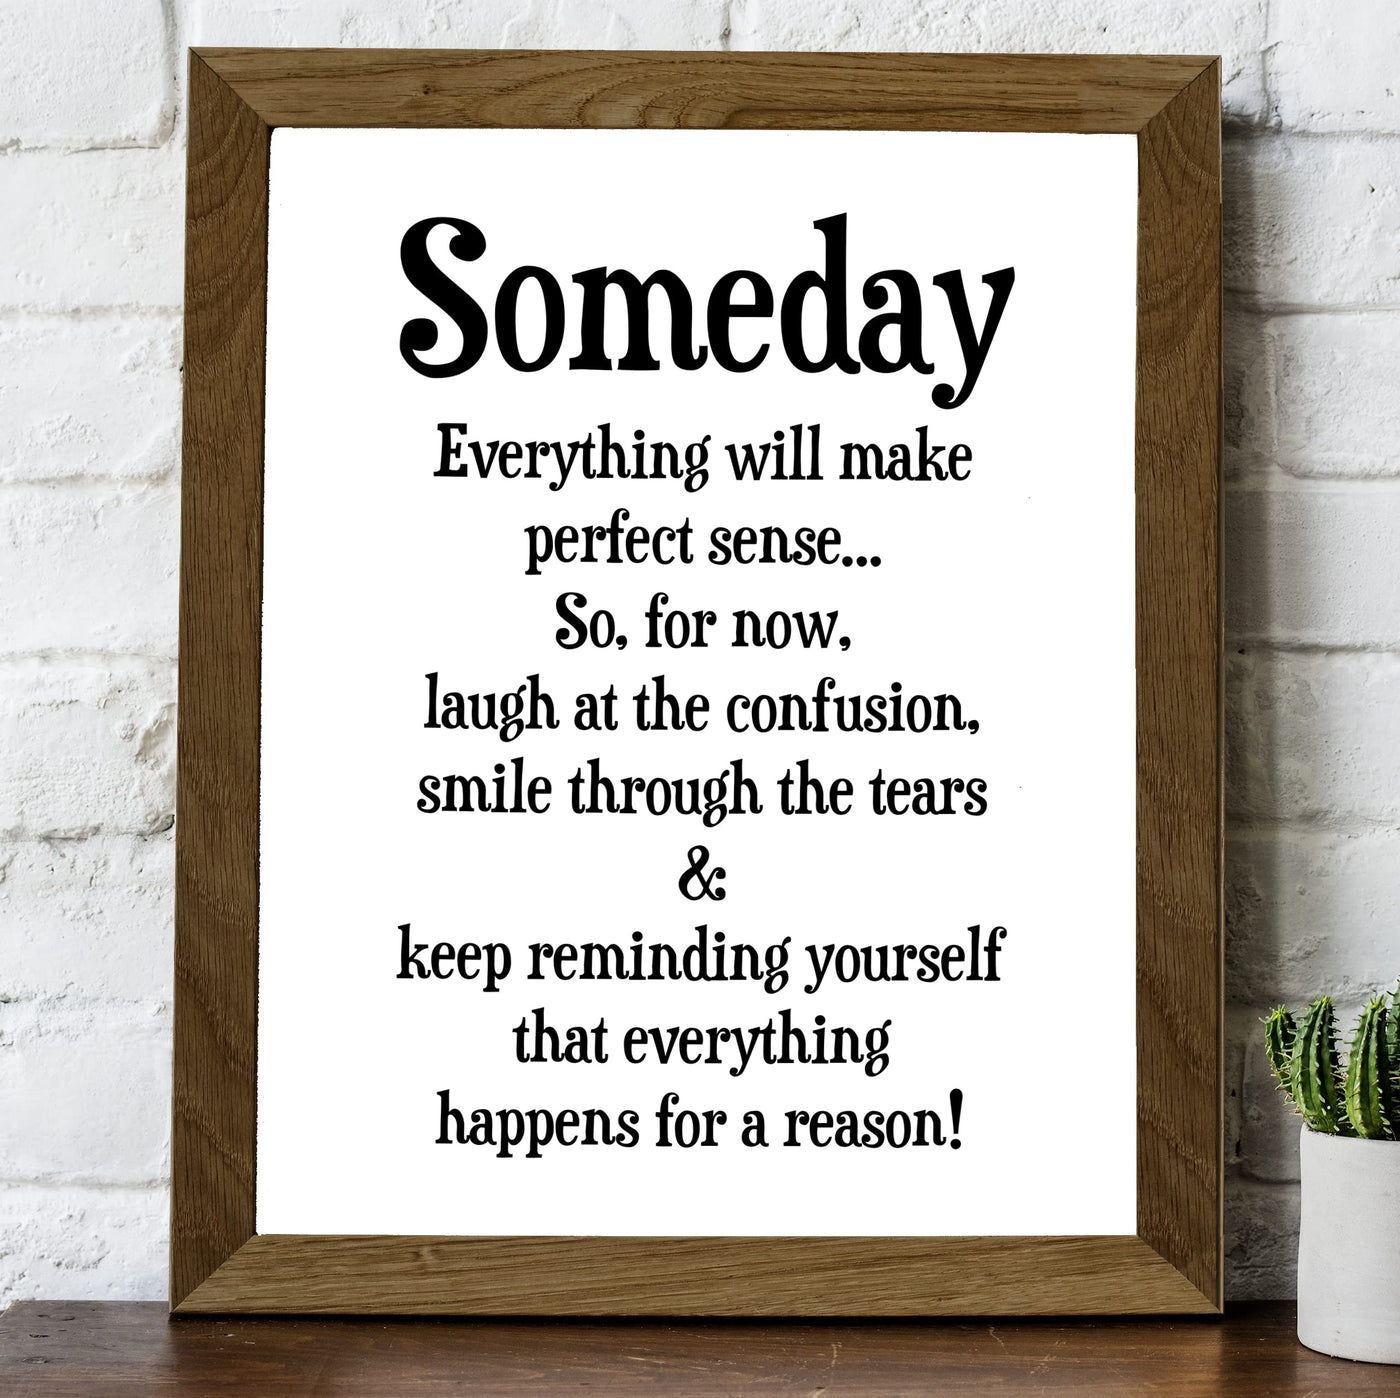 "Someday Everything Will Make Sense" Inspirational Quotes Wall Decor Sign -8 x 10" Motivational Art Print -Ready to Frame. Positive Home-Office-Classroom-Teen-Dorm Decor. Great Gift!